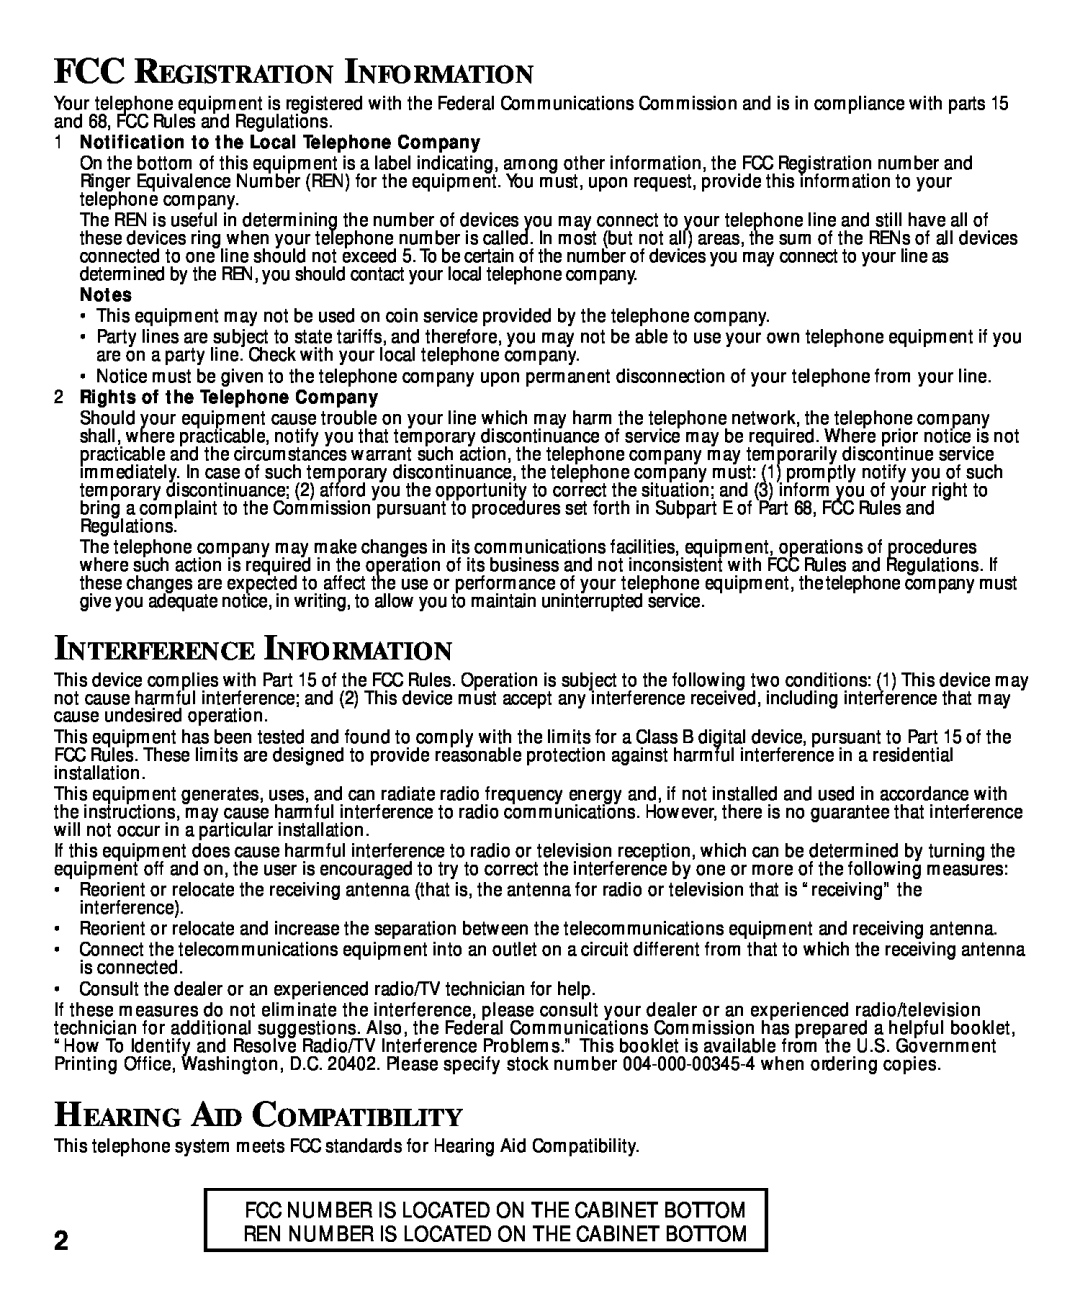 Technicolor - Thomson 29870 Series manual Fcc Registration Information, Interference Information, Hearing Aid Compatibility 